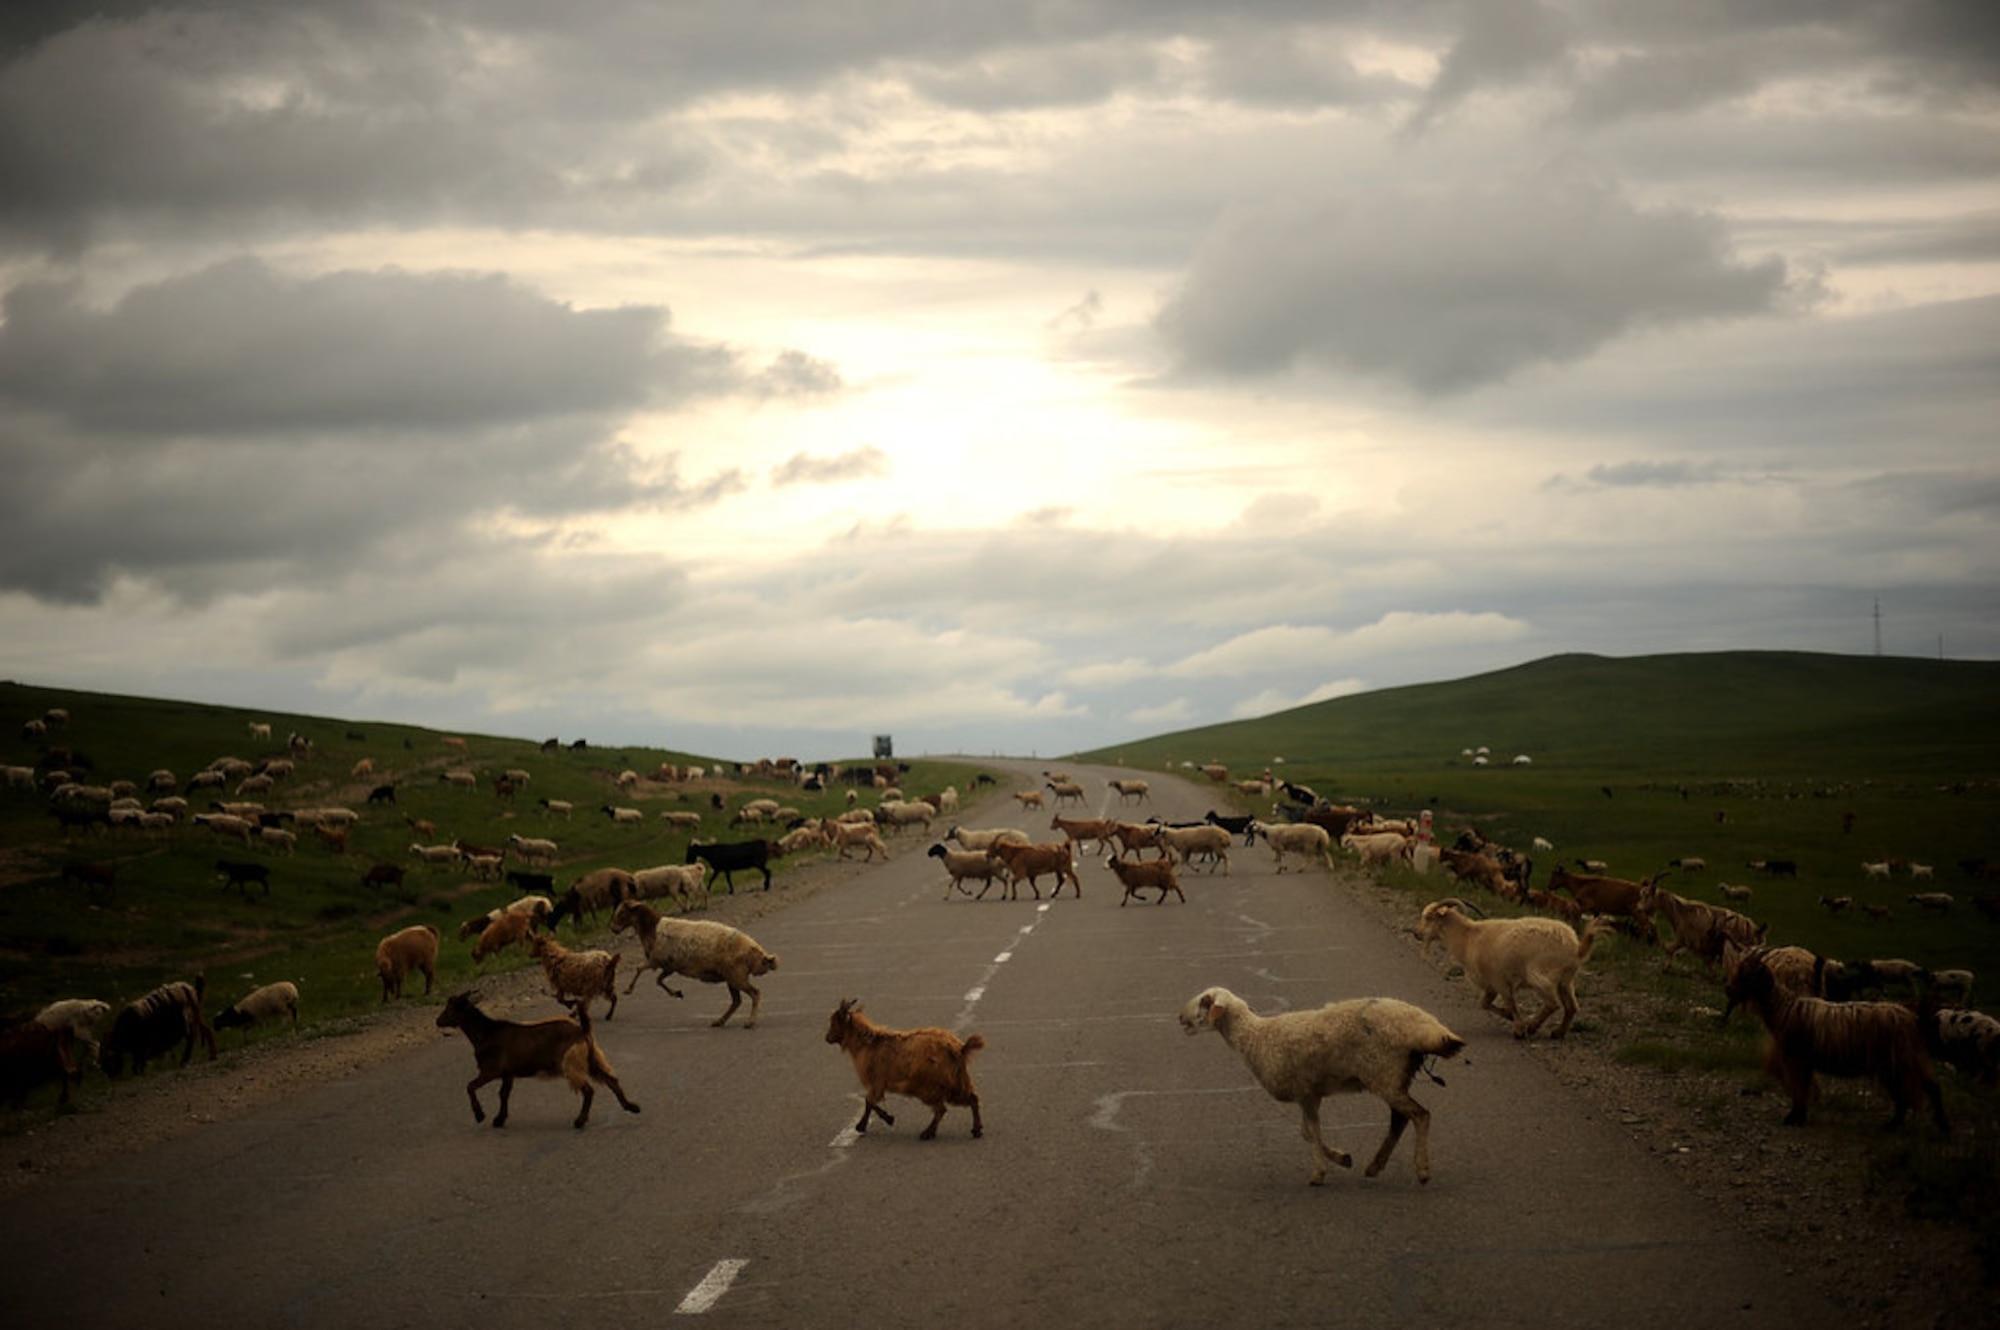 A flock of sheep cross a road in northeastern Mongolia. Mongolia is the land of livestock with more than 30 million livestock, including 13.8 million sheep, 10.2 million goats, 3.1 million cattle, 2.6 million horses and 322,300 Bactrian camels. The livestock is permanently threatened by the fragile condition of pastureland, severe winters and endemic animal diseases. To cope in the short term, herders at the subsistence level may have to sell animals. With fewer animals they find it even harder to survive. Herders are among the poorest of the poor in Mongolia.